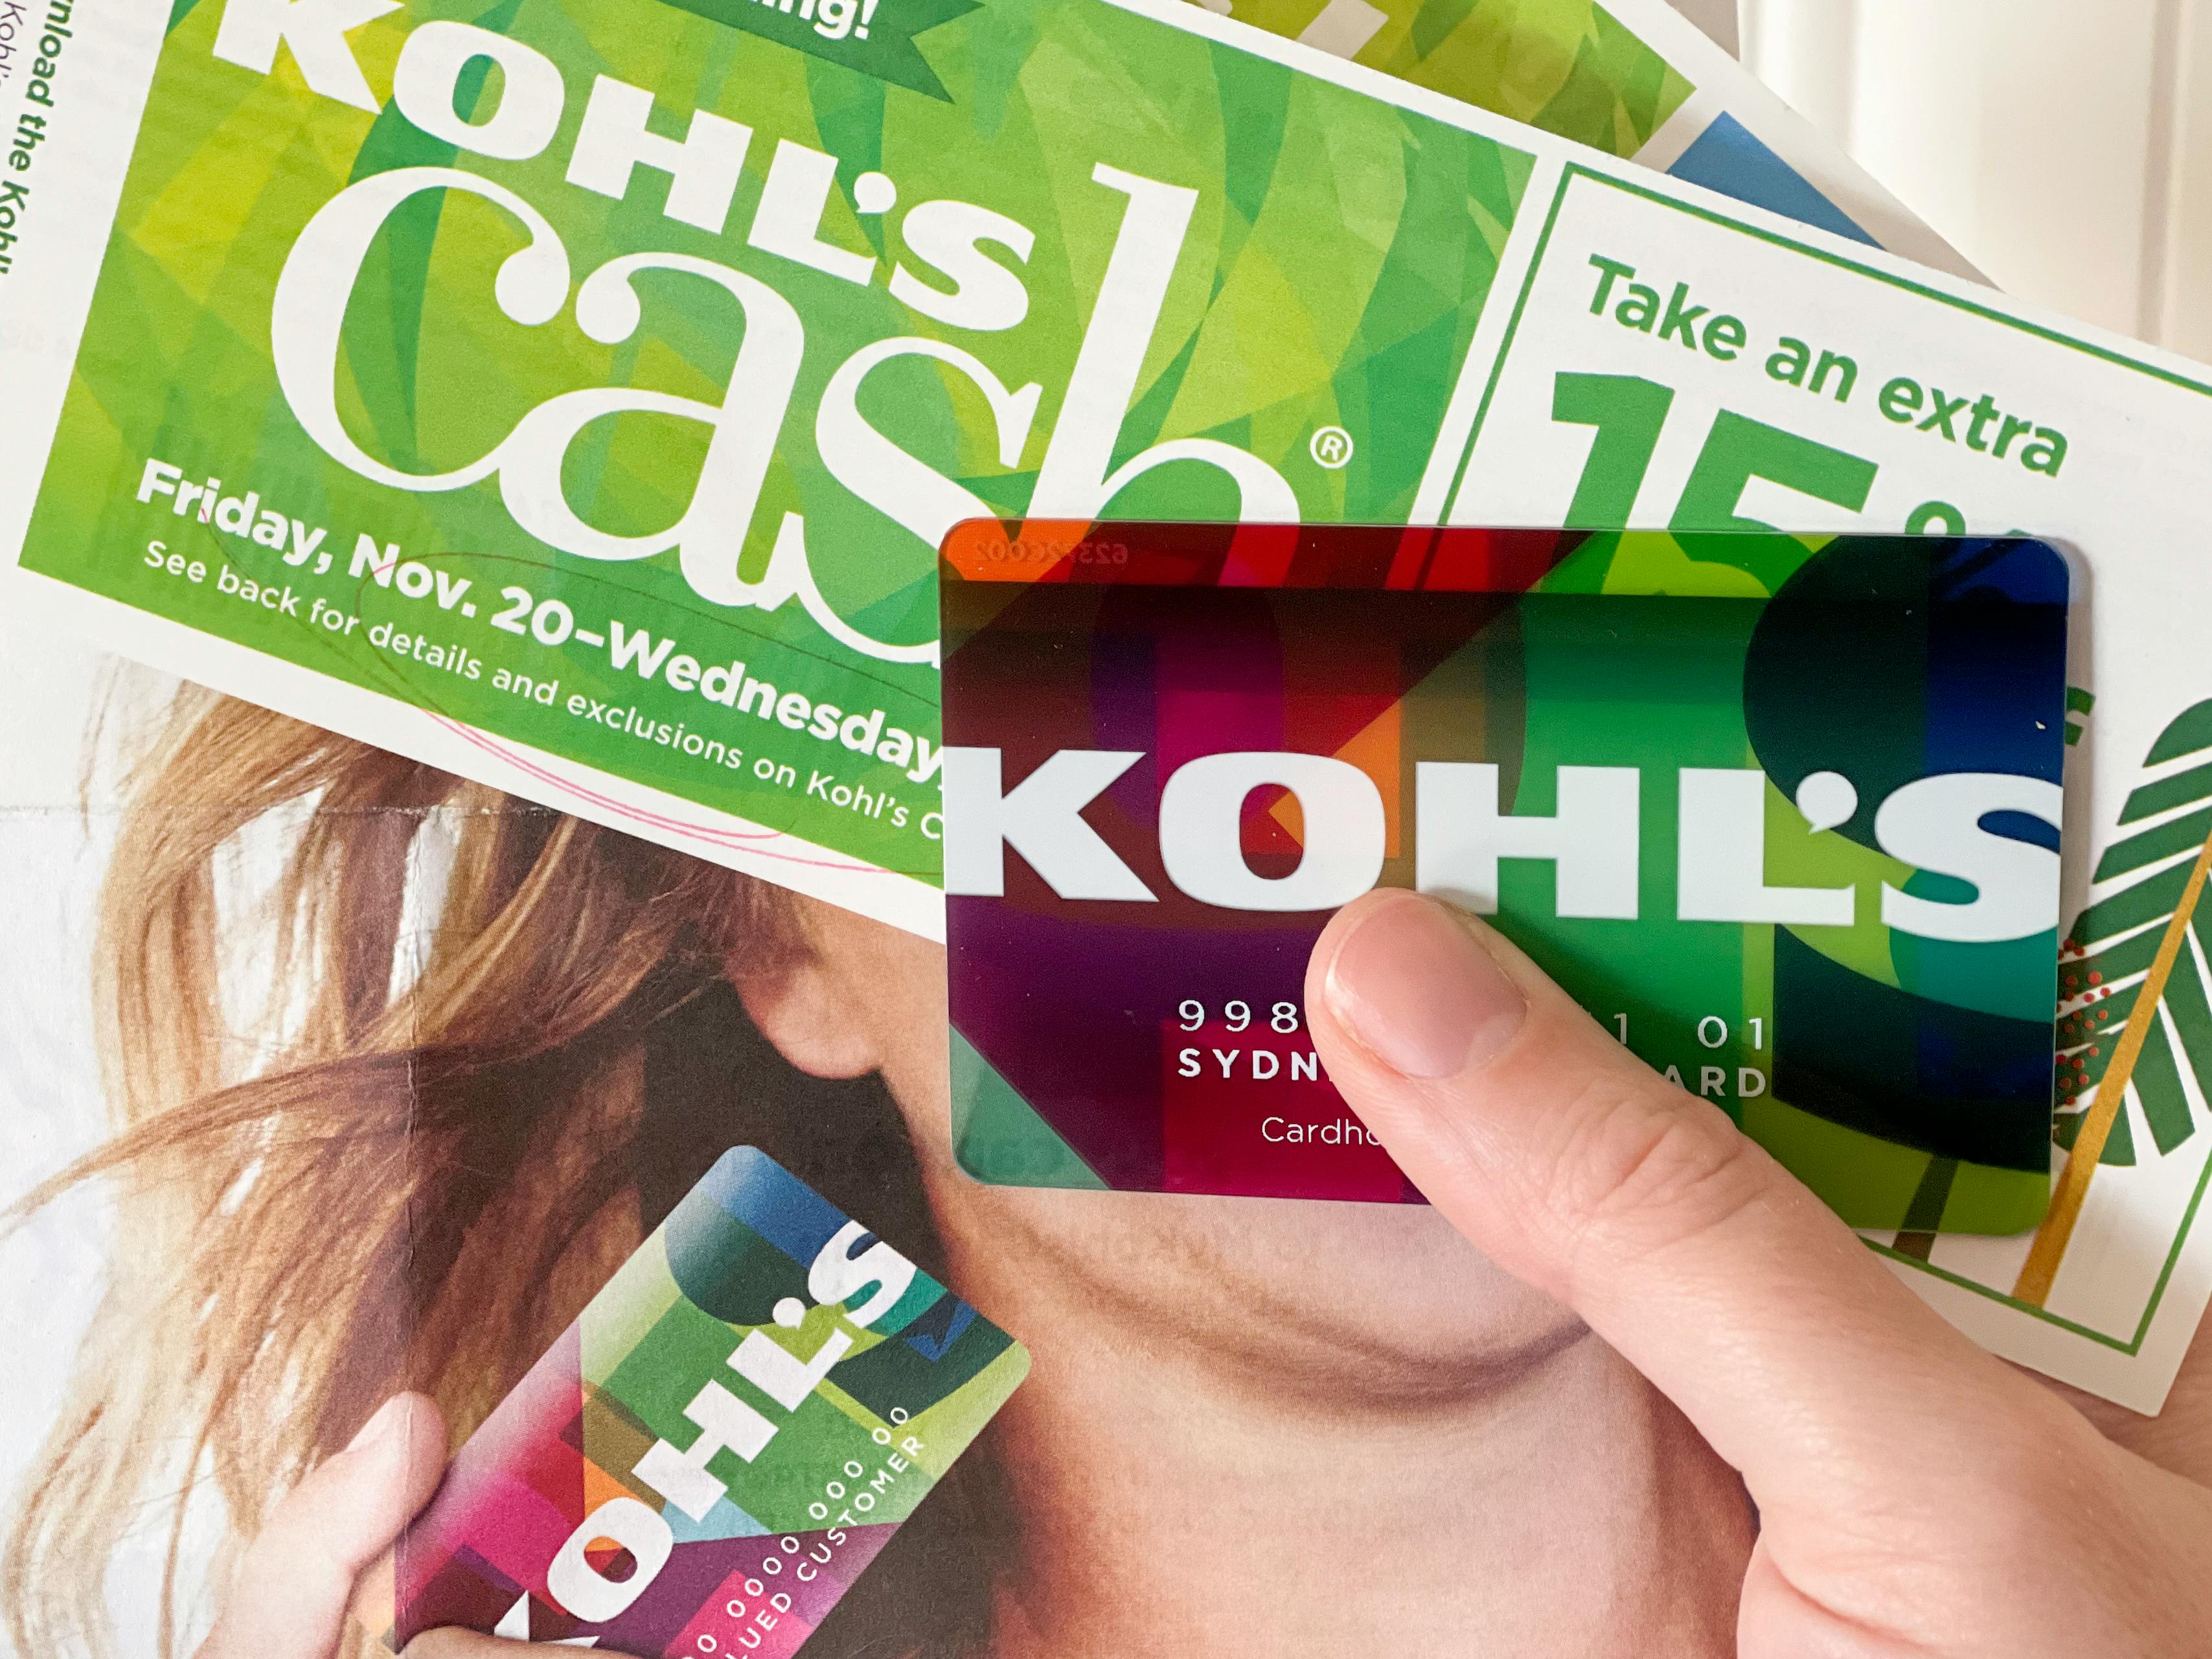 Kohls Credit Card Review for 2023: Pros and Cons